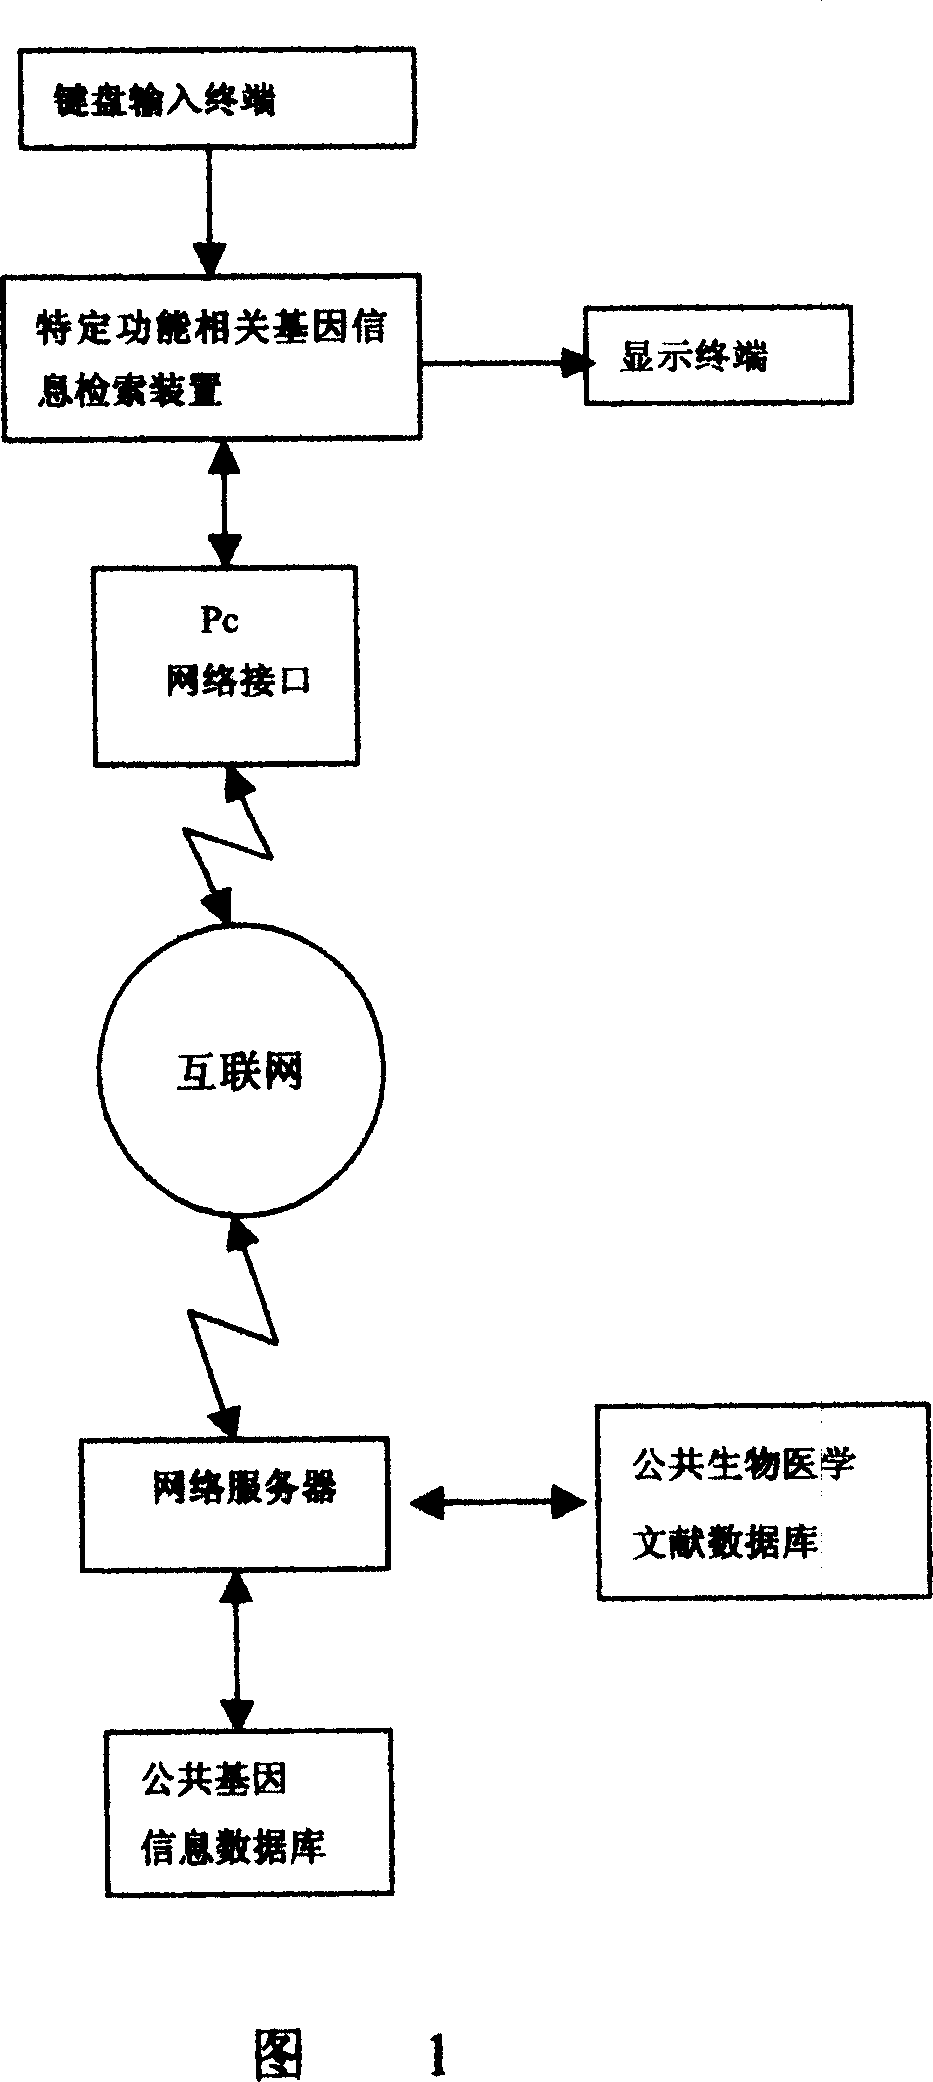 Specific function-related gene information searching system and method for building database of searching workds thereof